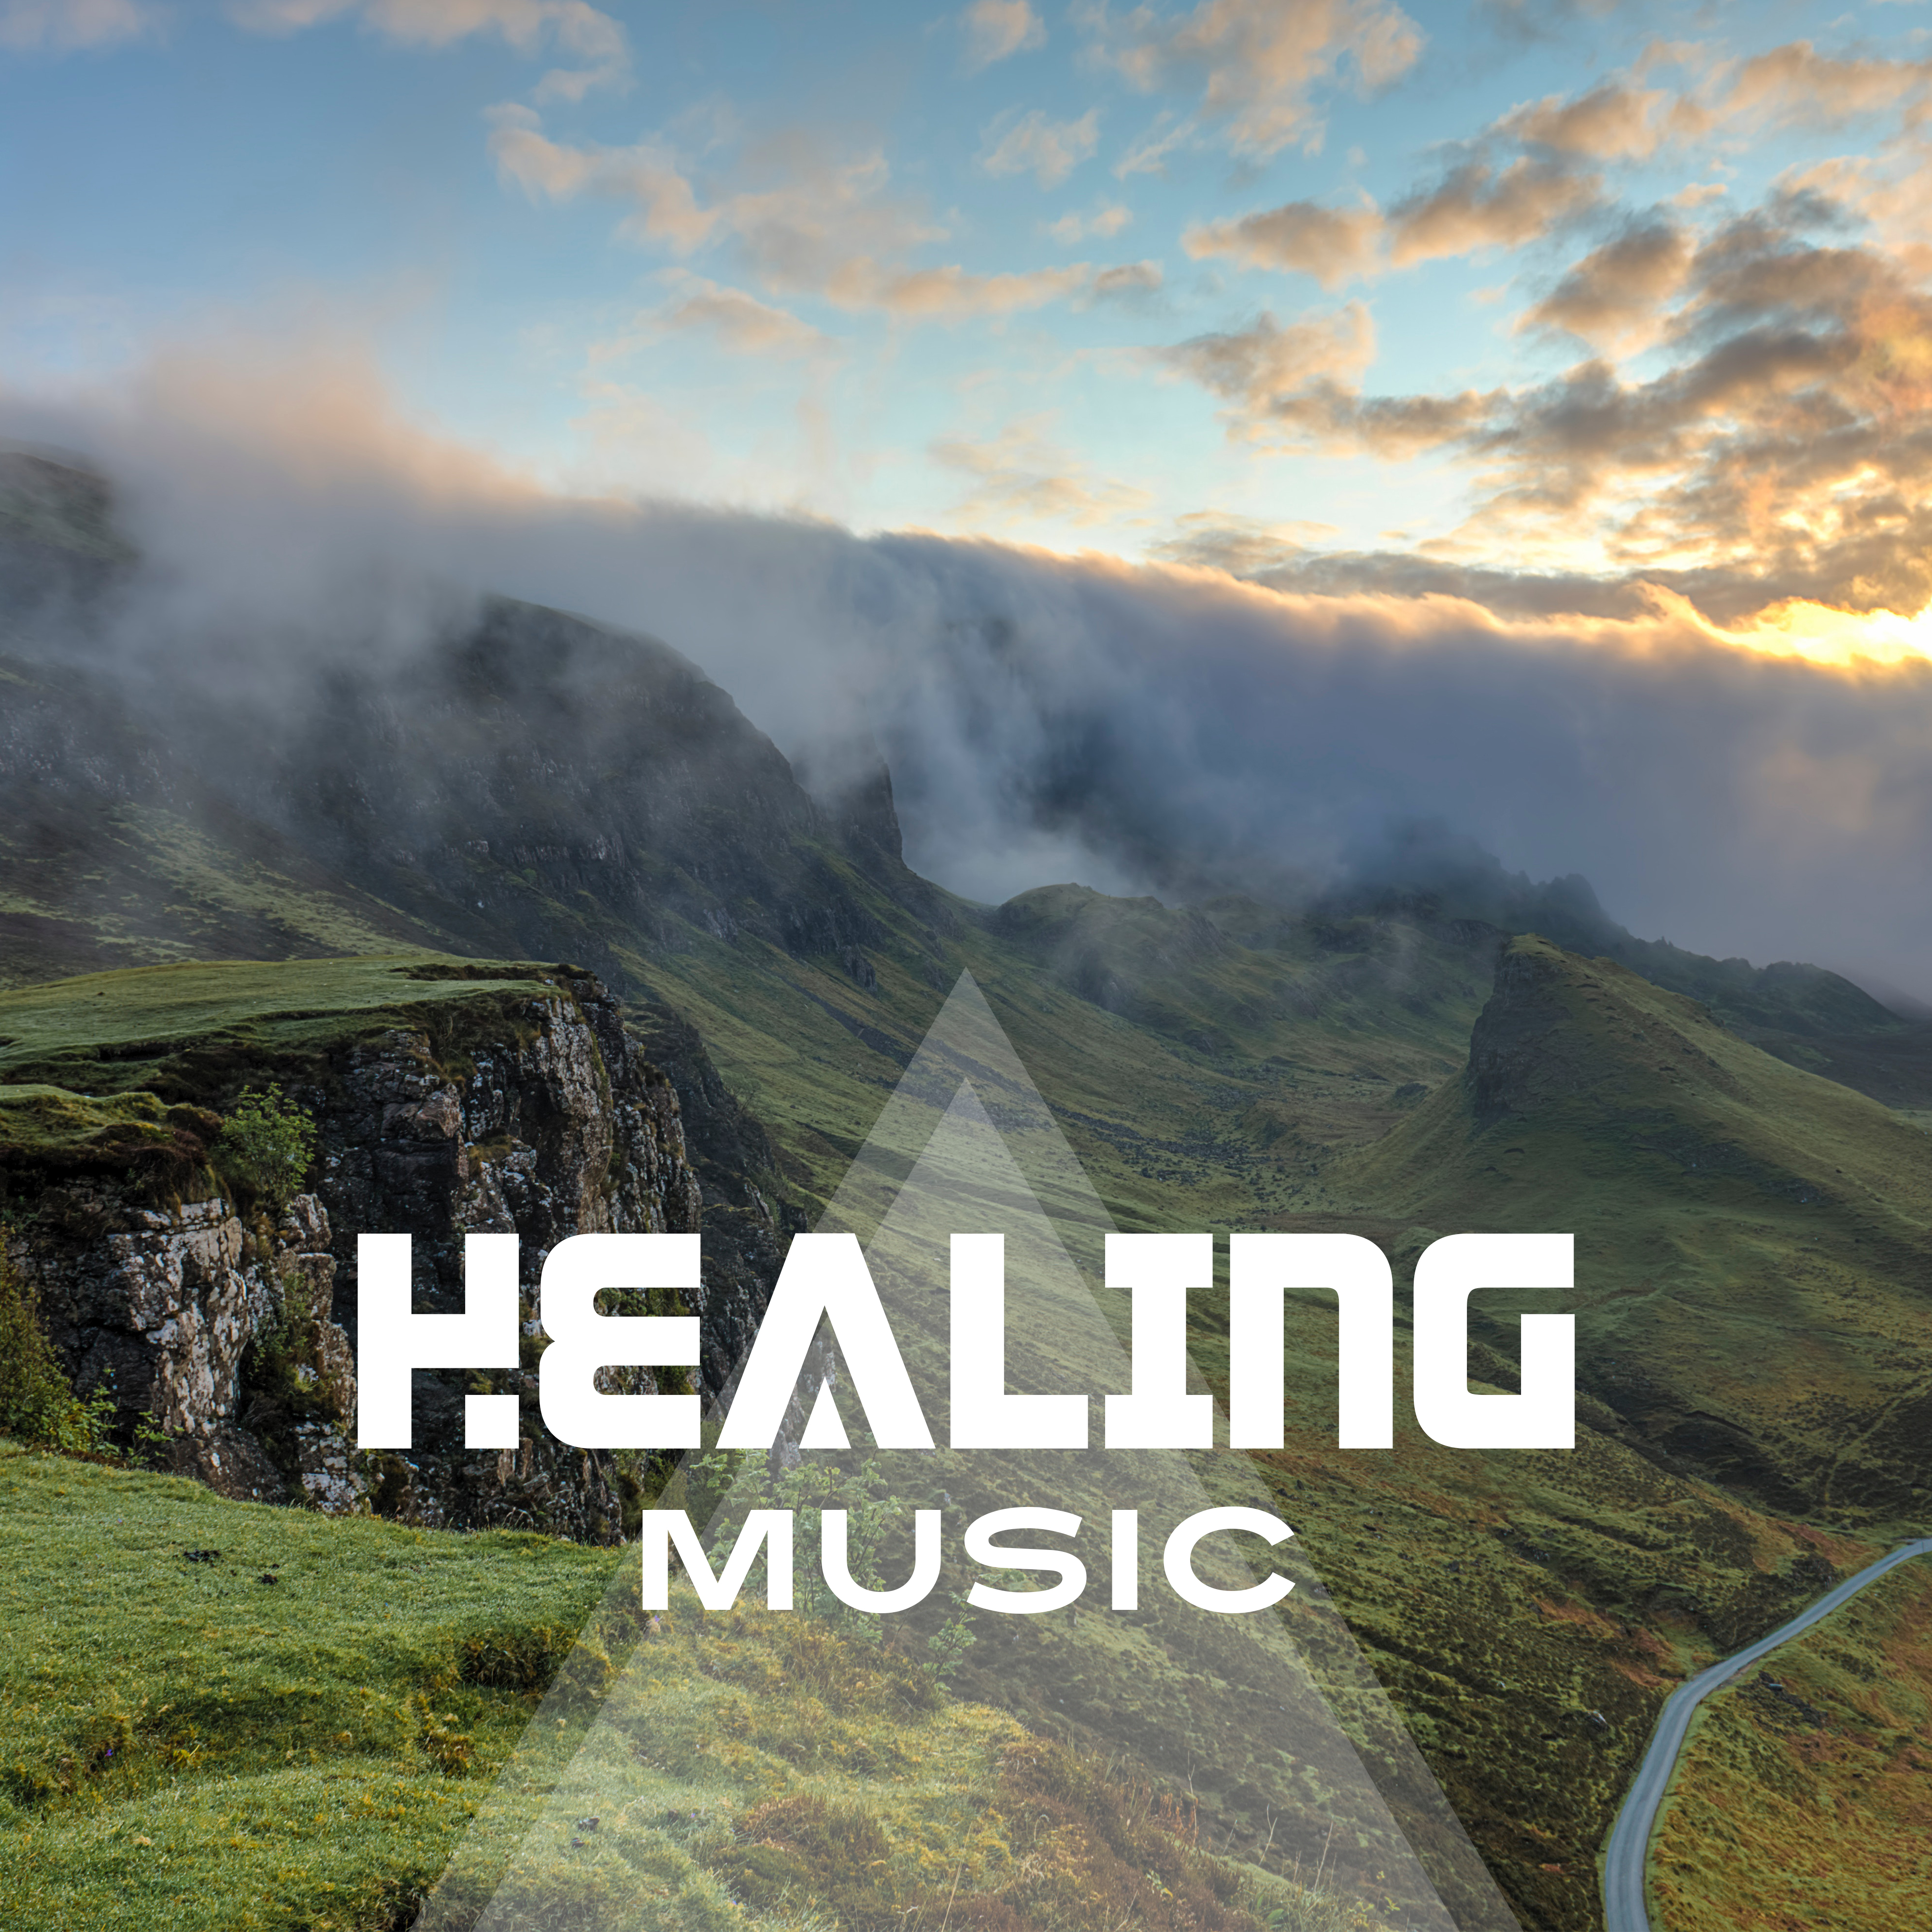 Healing Music – Pure Relaxation, Zen Energy, Soft Music to Calm Down, Inner Silence, Rest